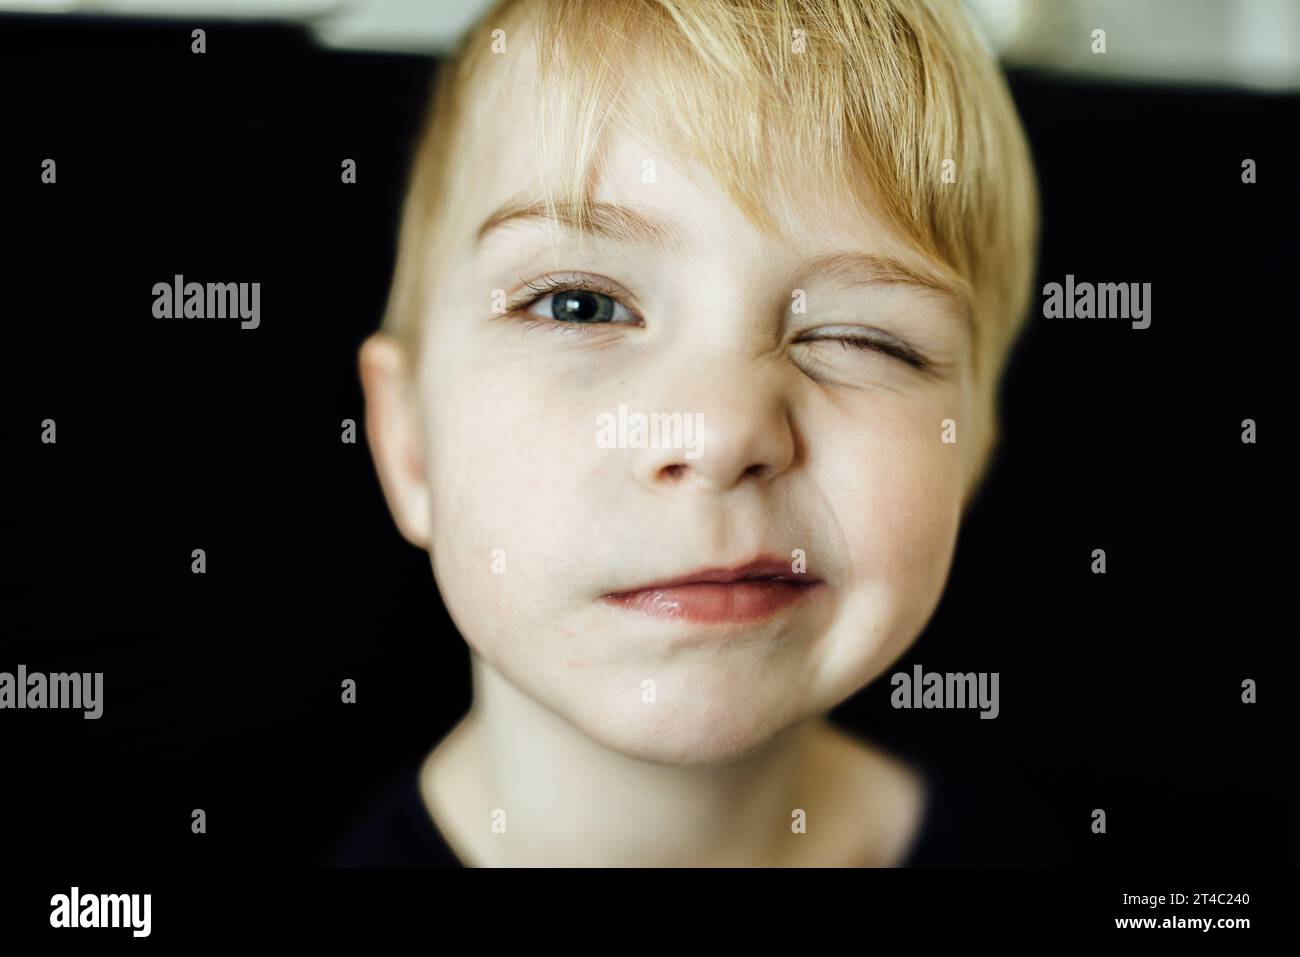 Young boy winks with goofy face at camera with black background Stock Photo